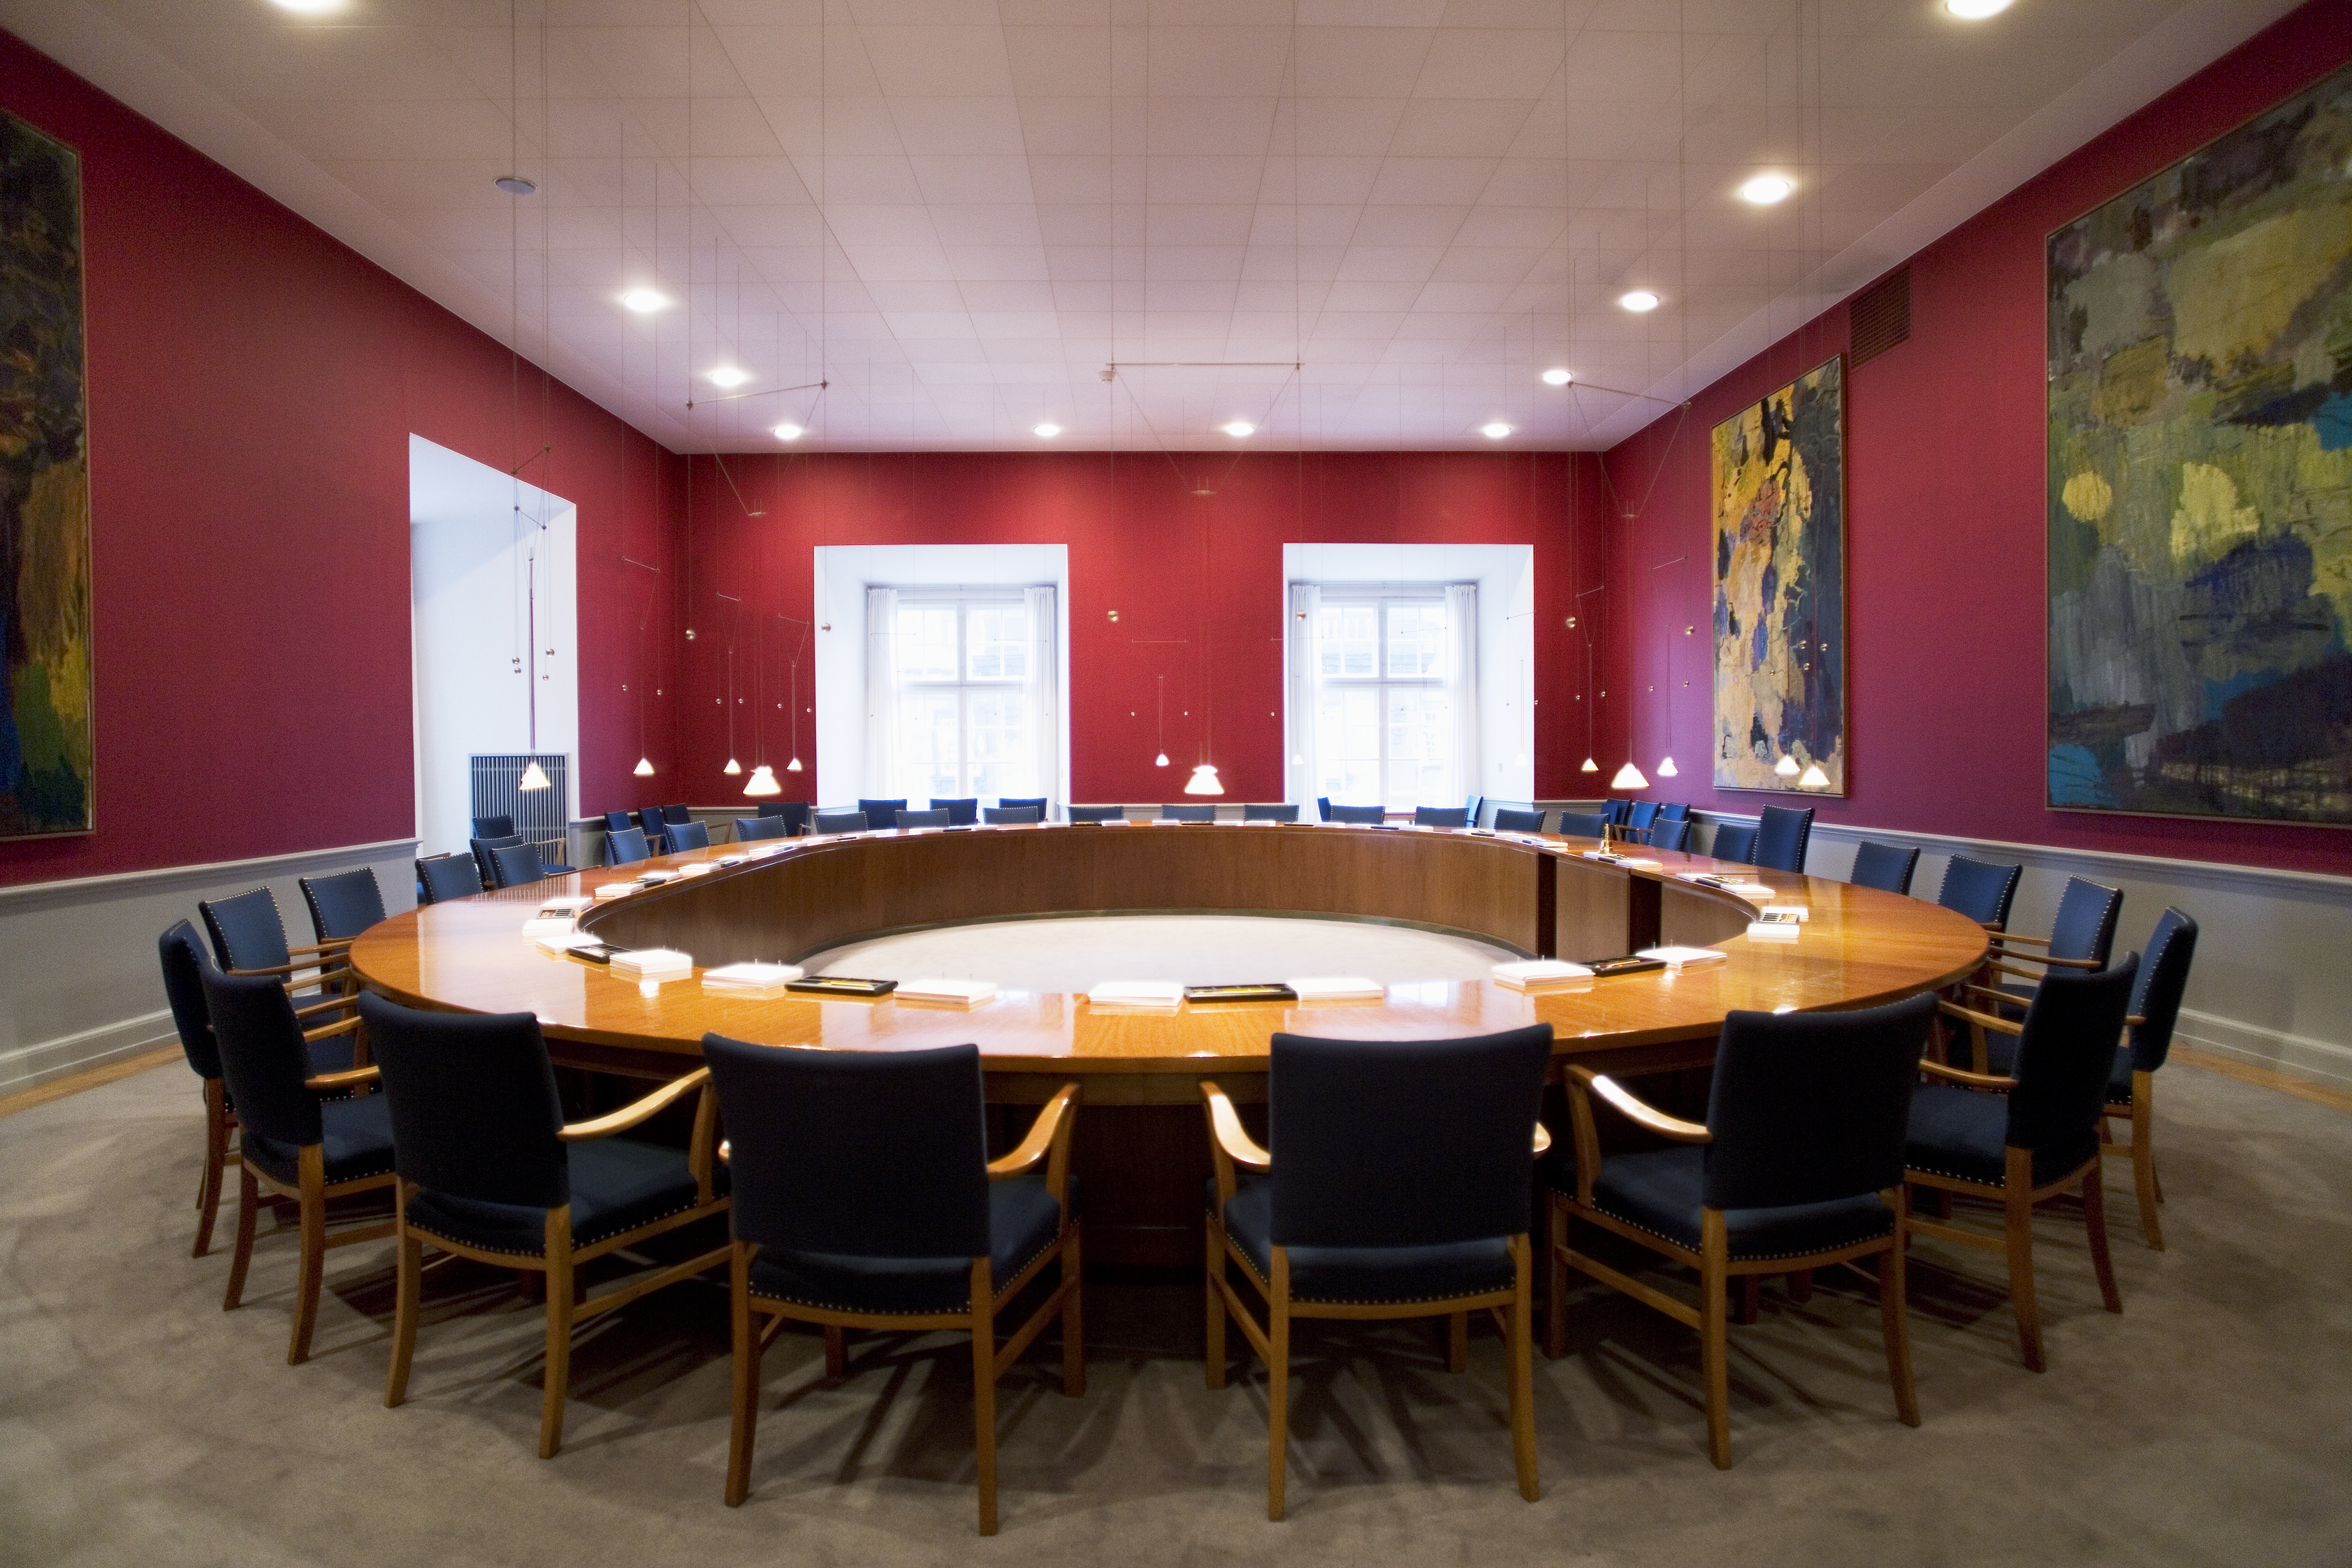 A meeting room with a large round table with chairs around it in the centre. 